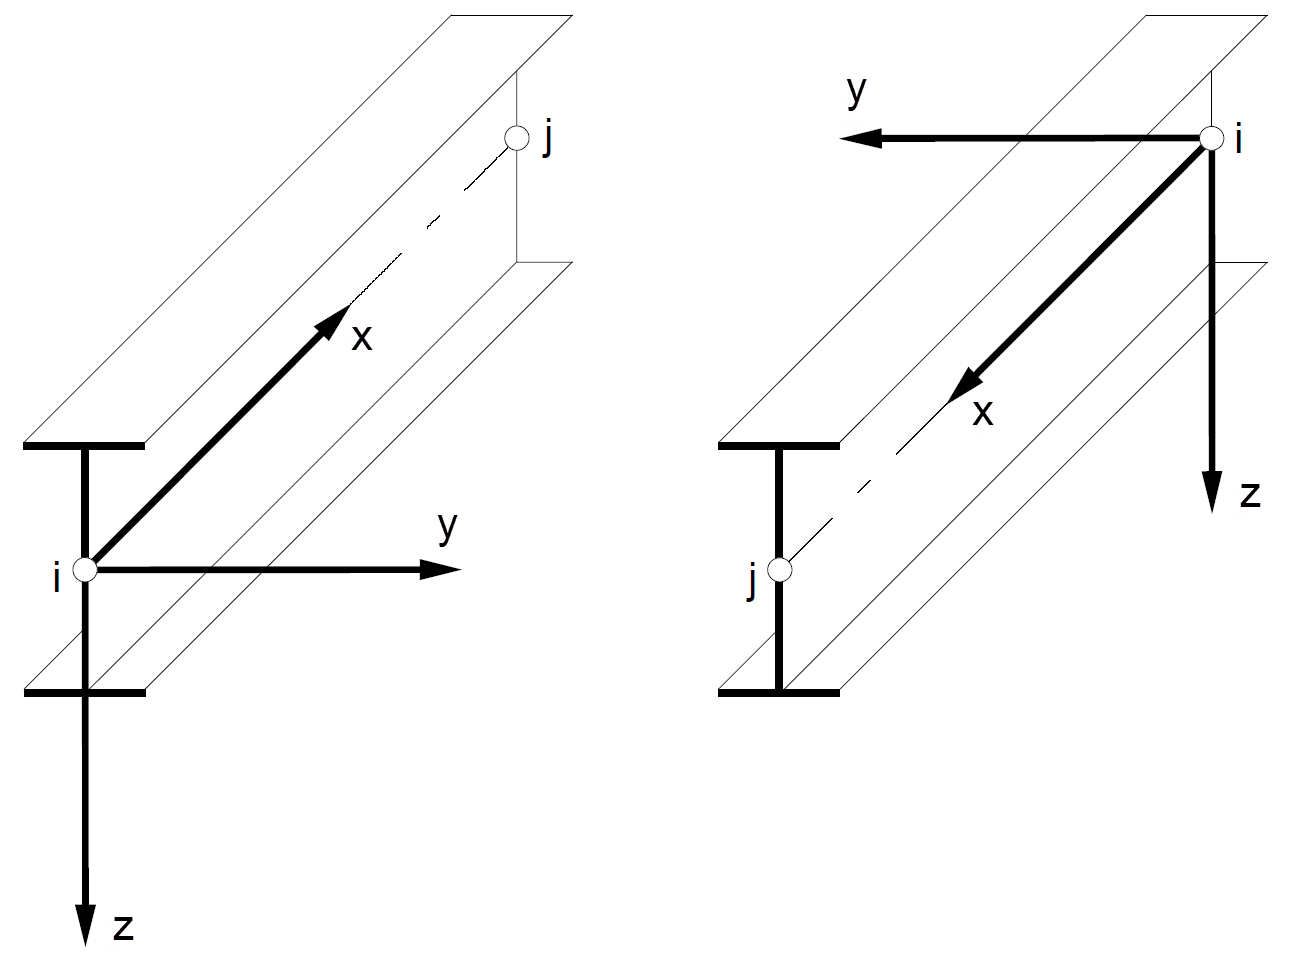 Figure 01 - Local Member Axes x, y, and z